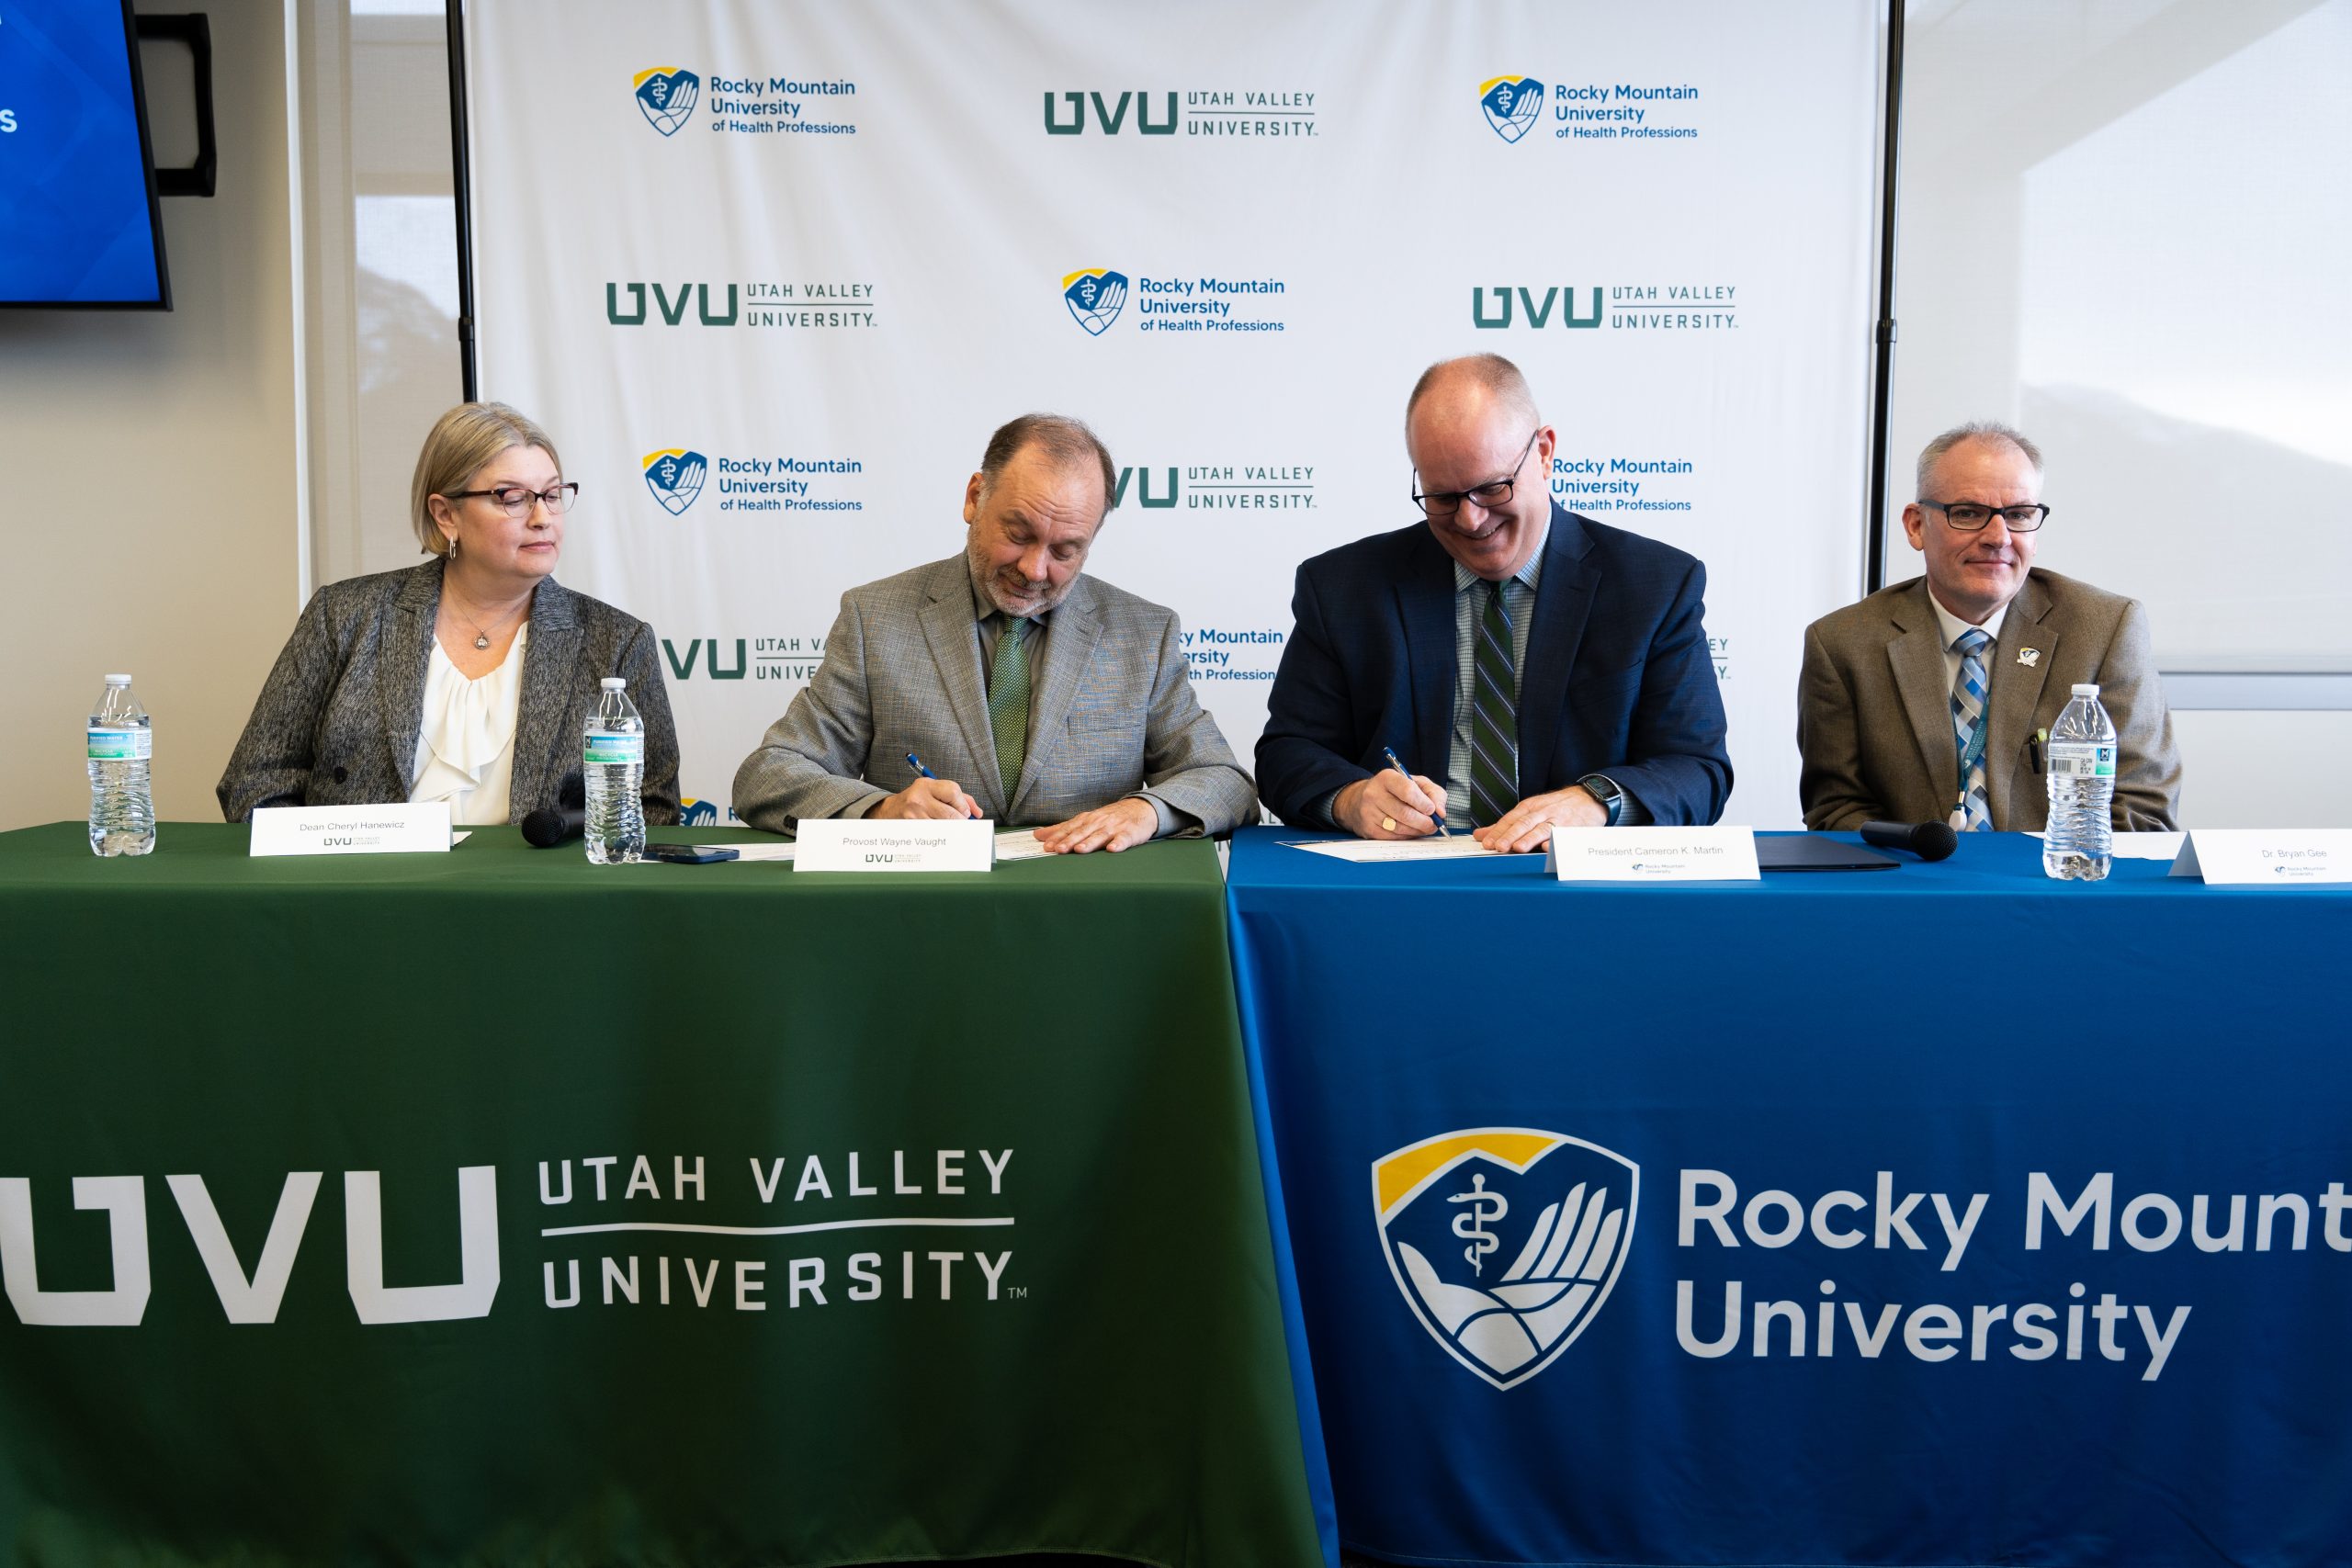 Utah Valley University and Rocky Mountain University Partner to Educate Future Occupational Therapists